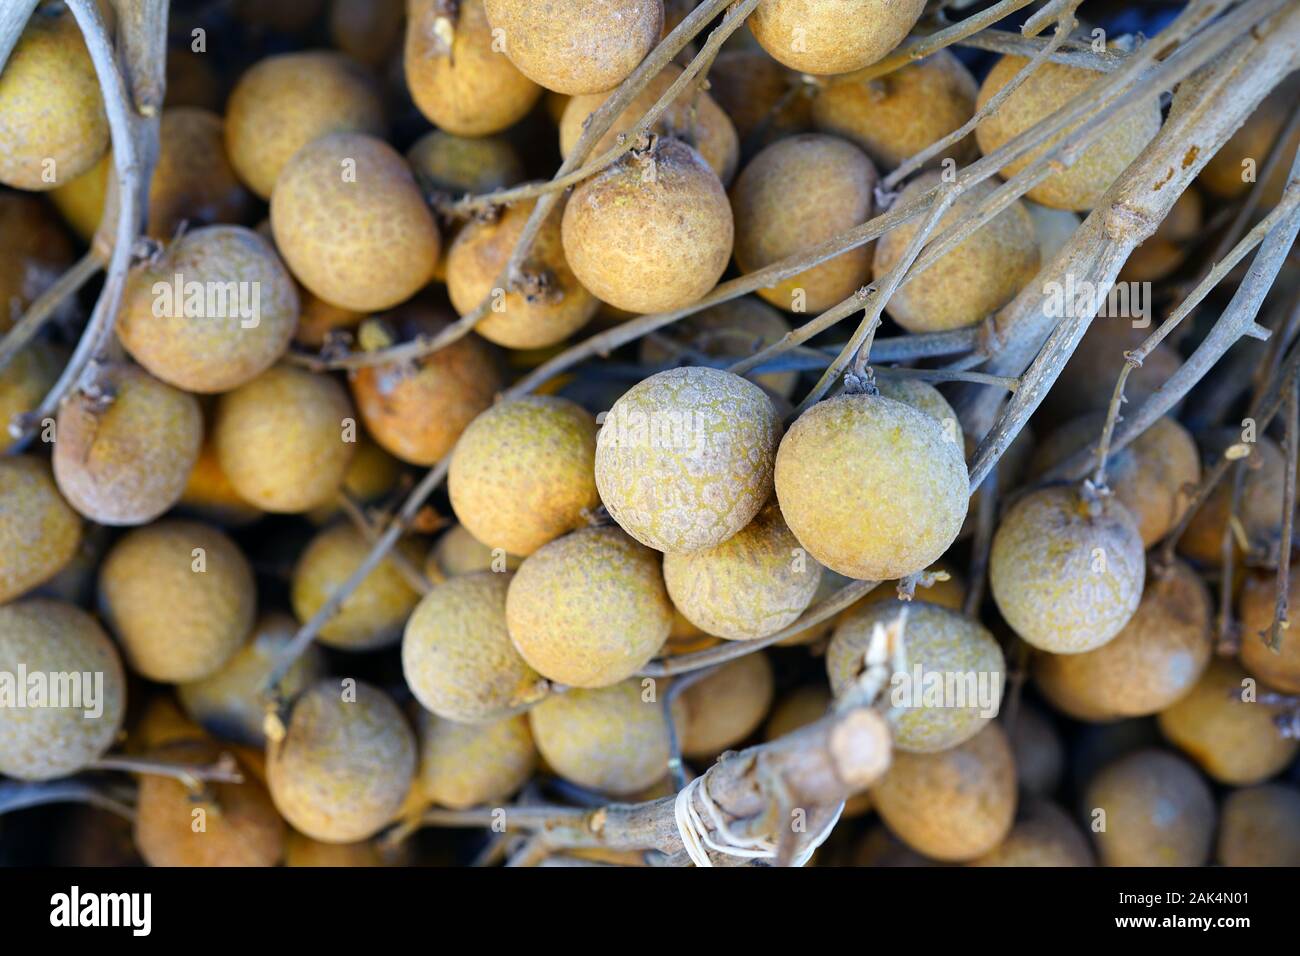 Bunches of longan fruit for sale at a market in Malaysia Stock Photo